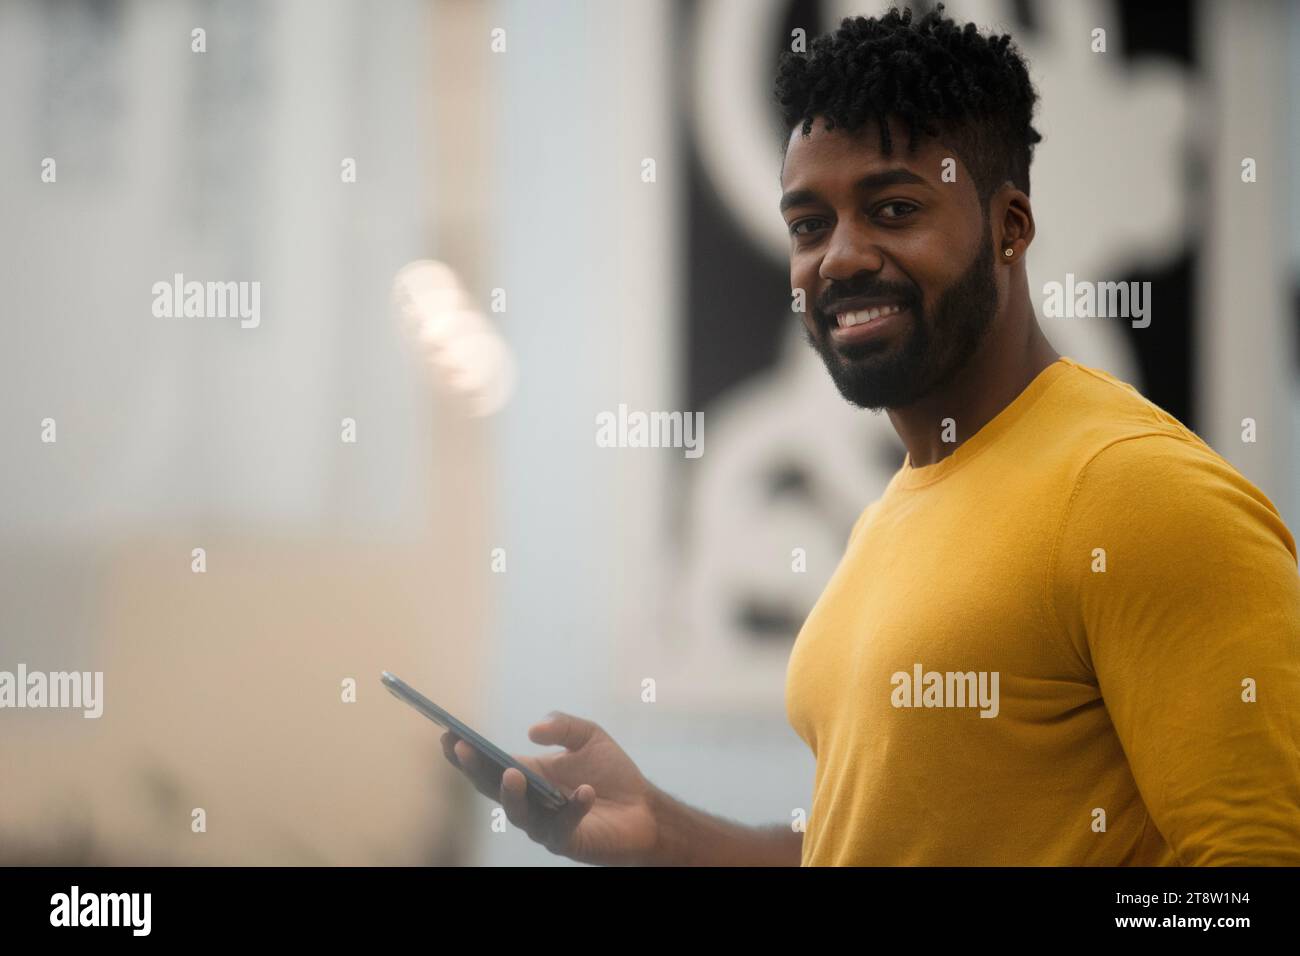 African American man looking at the camera while holding smart phone Stock Photo